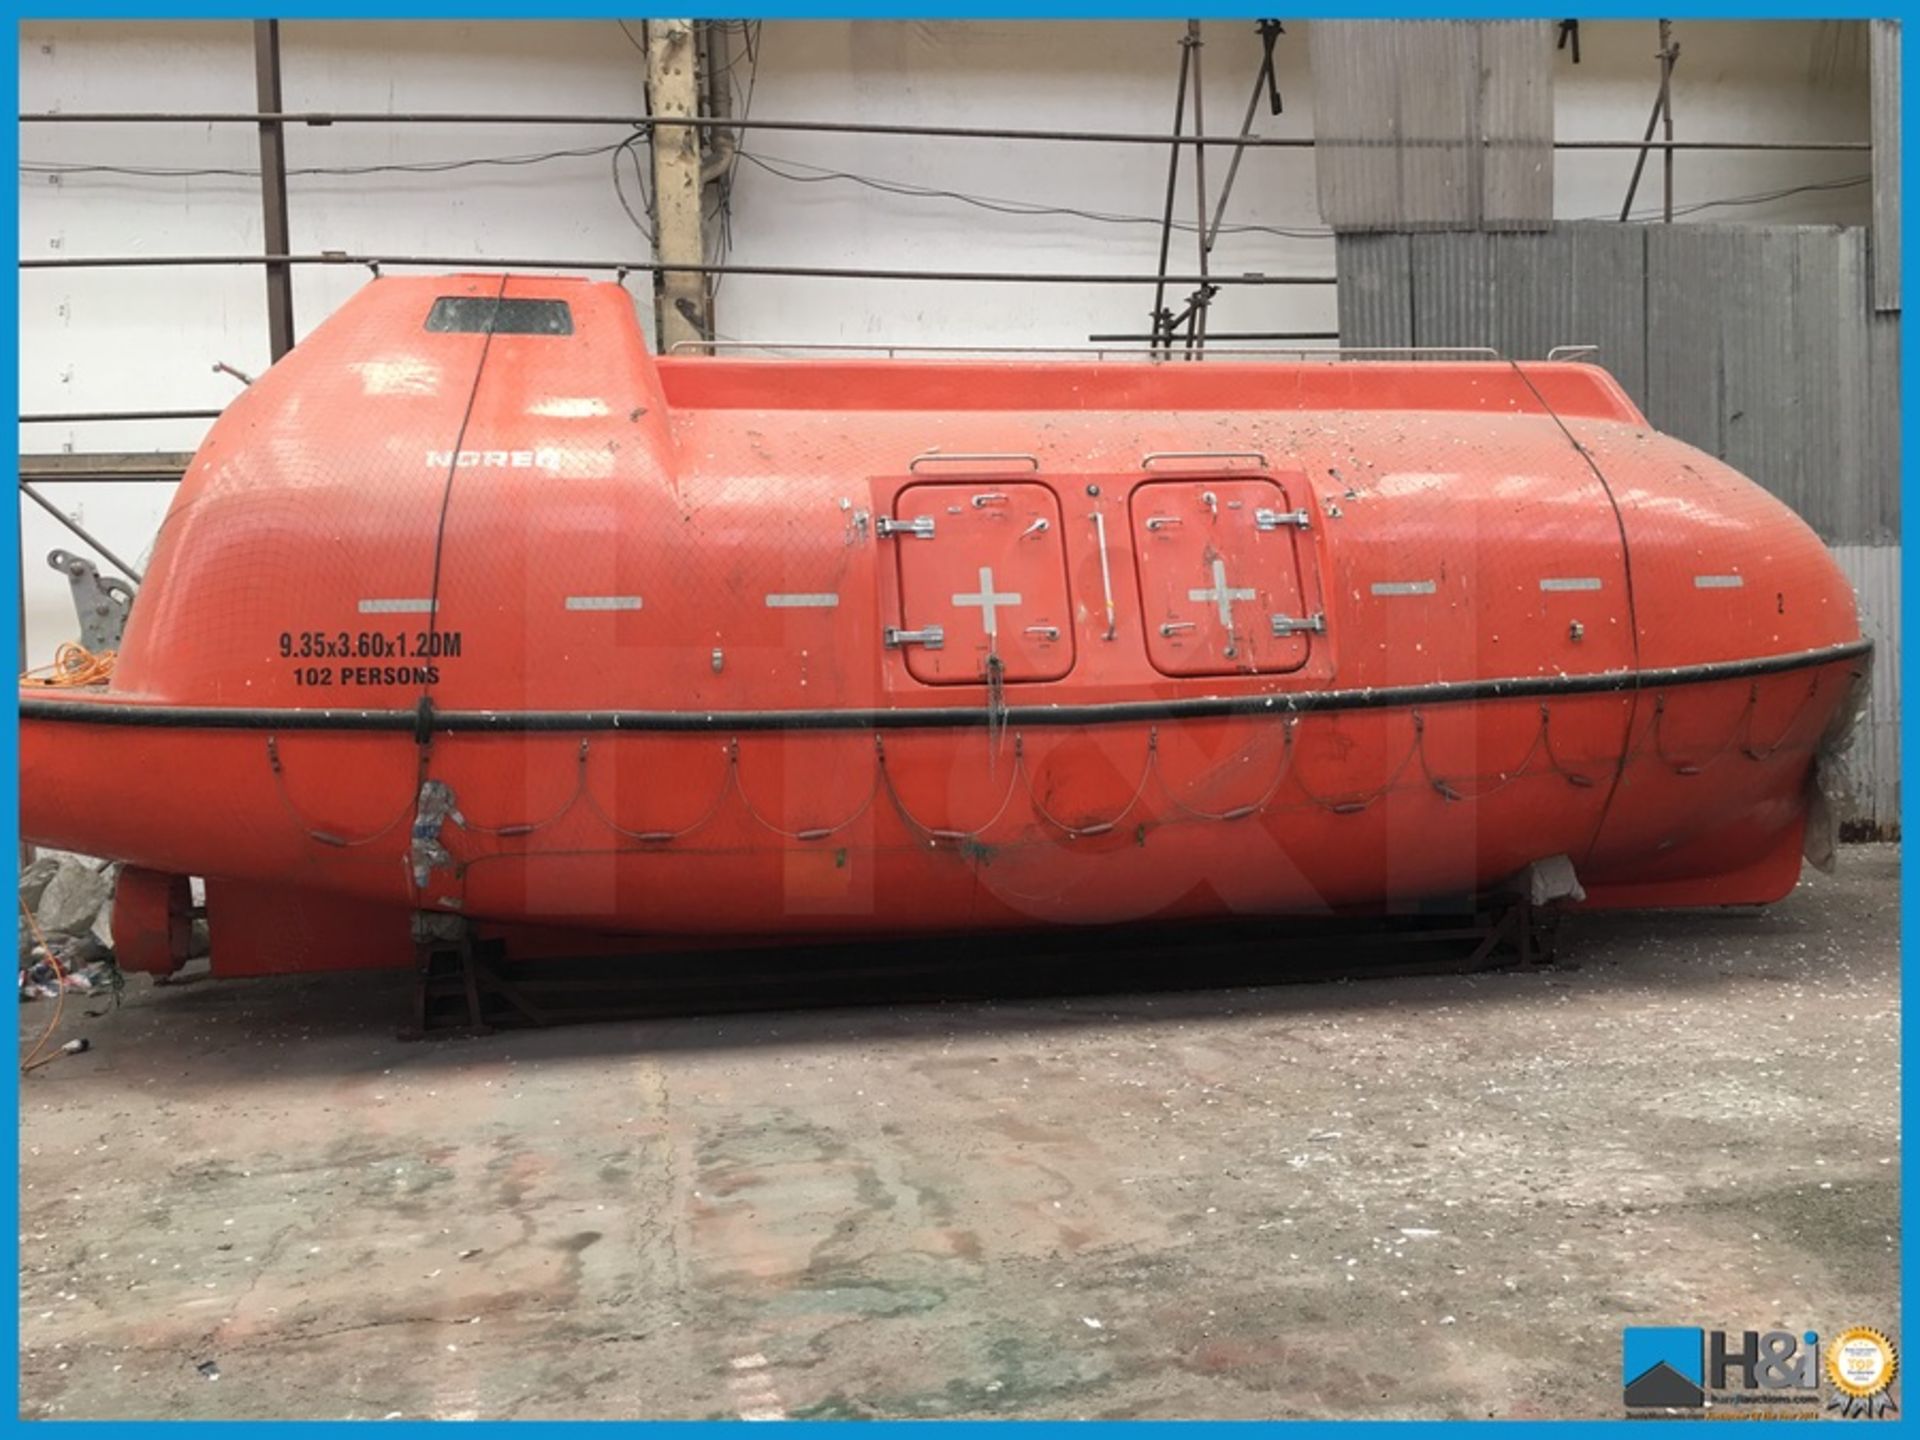 Noreq LBT935T totally enclosed lifeboat built approximately 2010 for same marine project as the - Image 3 of 38